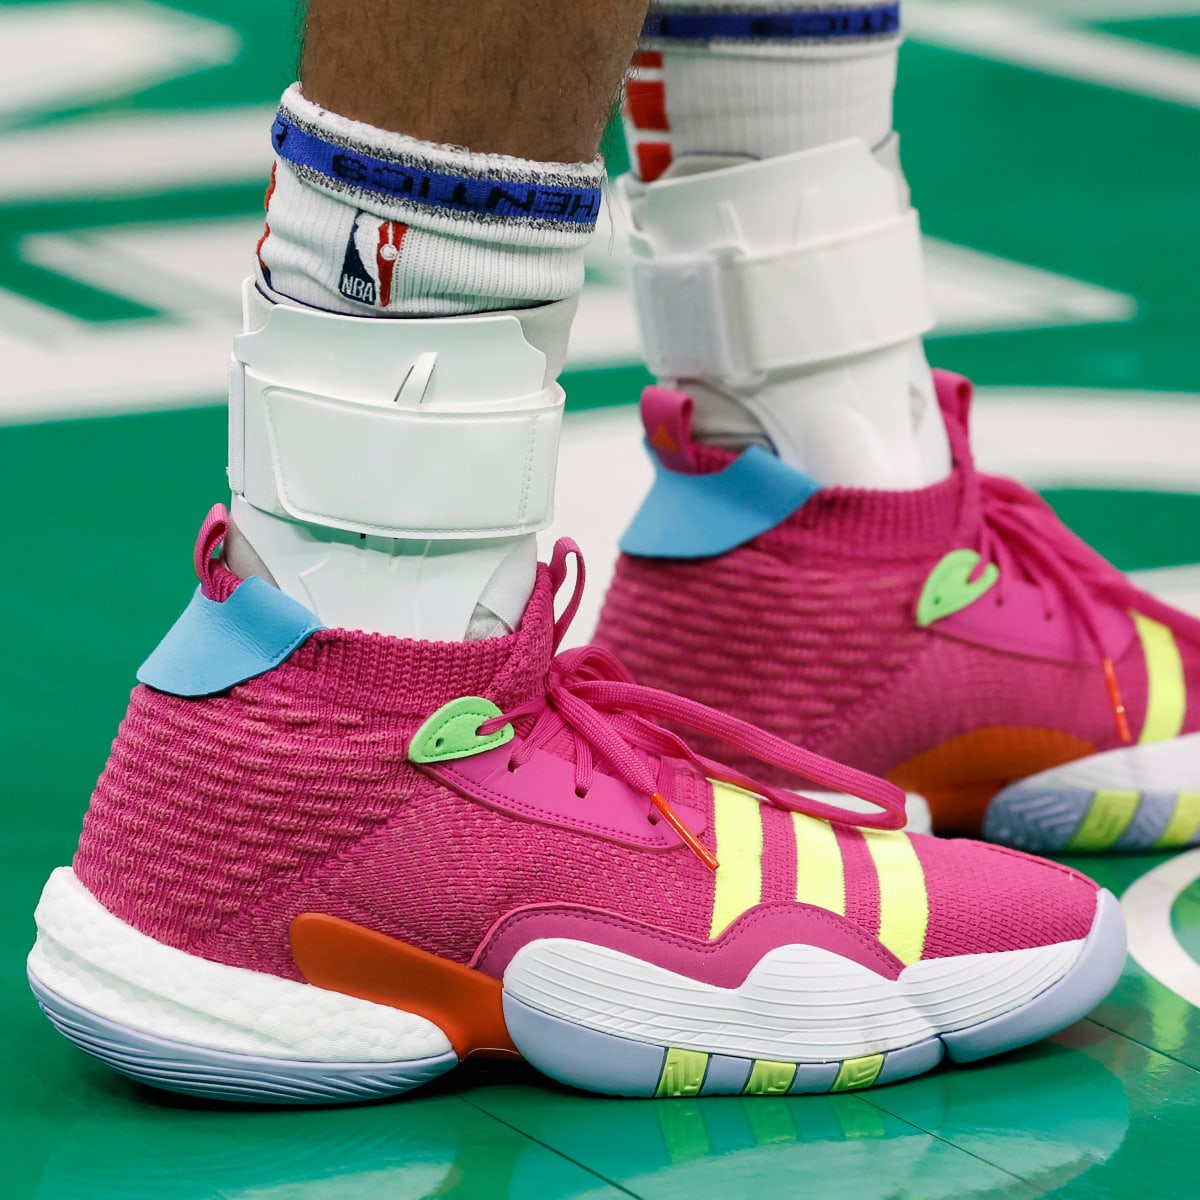 Young Wins Game 5 in Signature Adidas Shoe - Sports FanNation Kicks News, and More